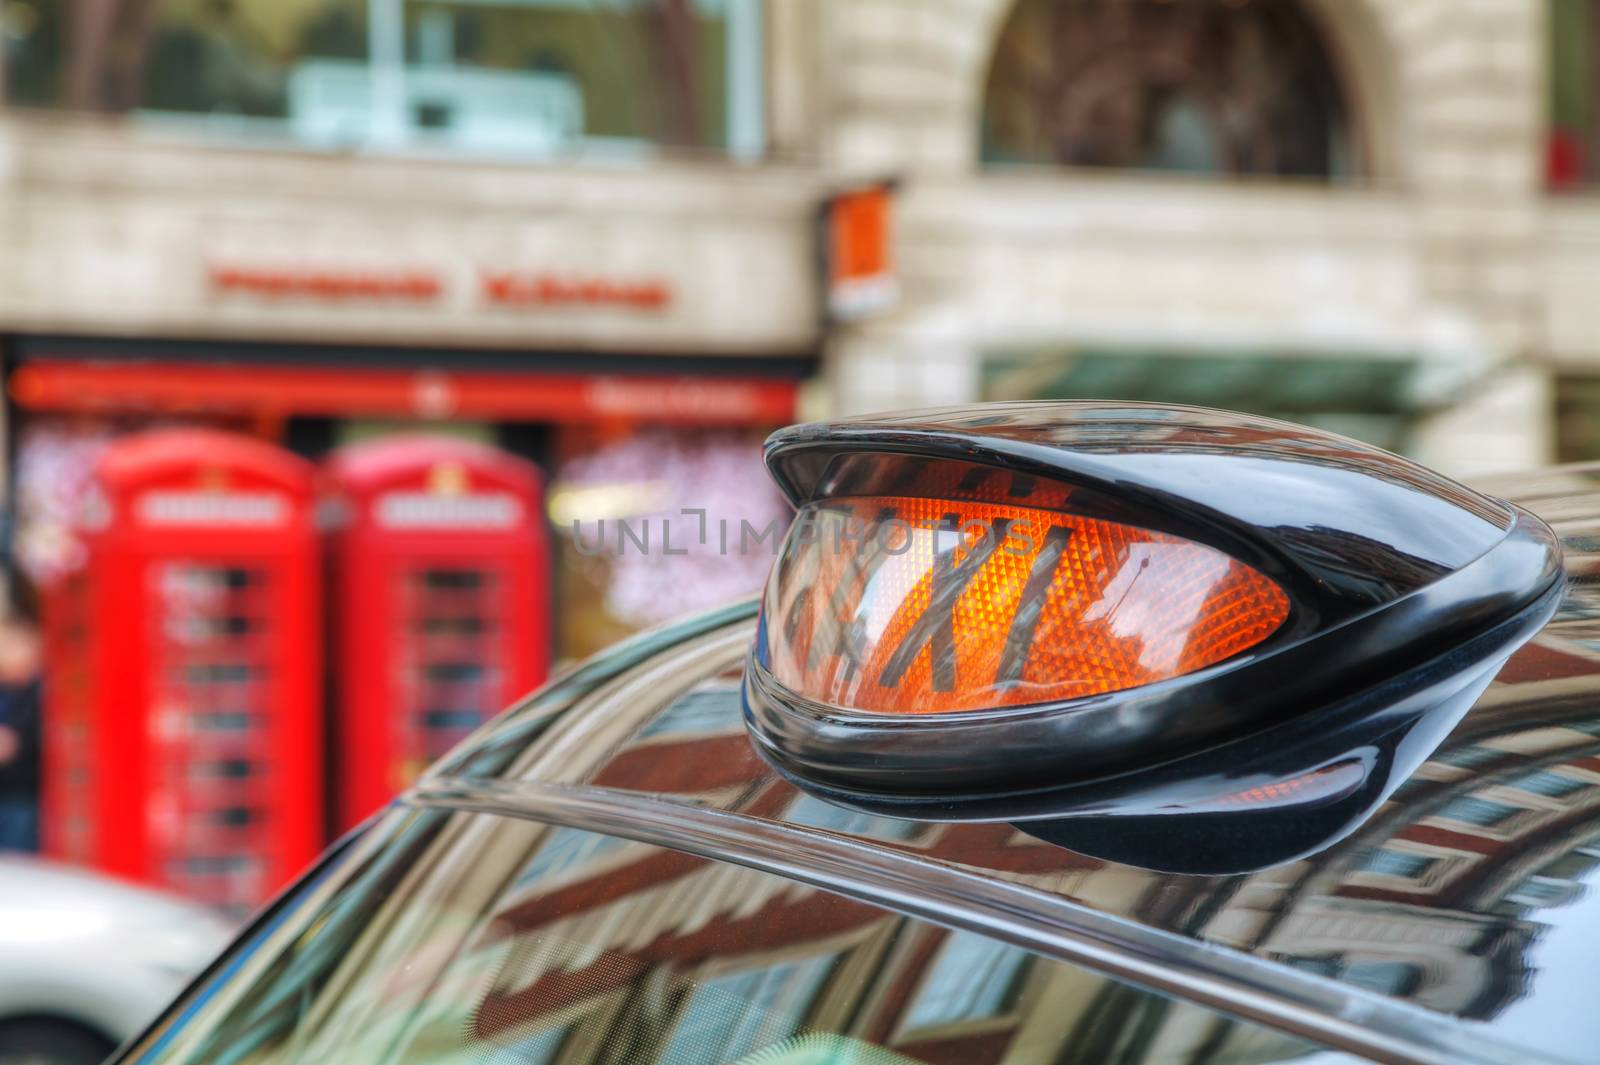 Famous black cab on a street in London by AndreyKr